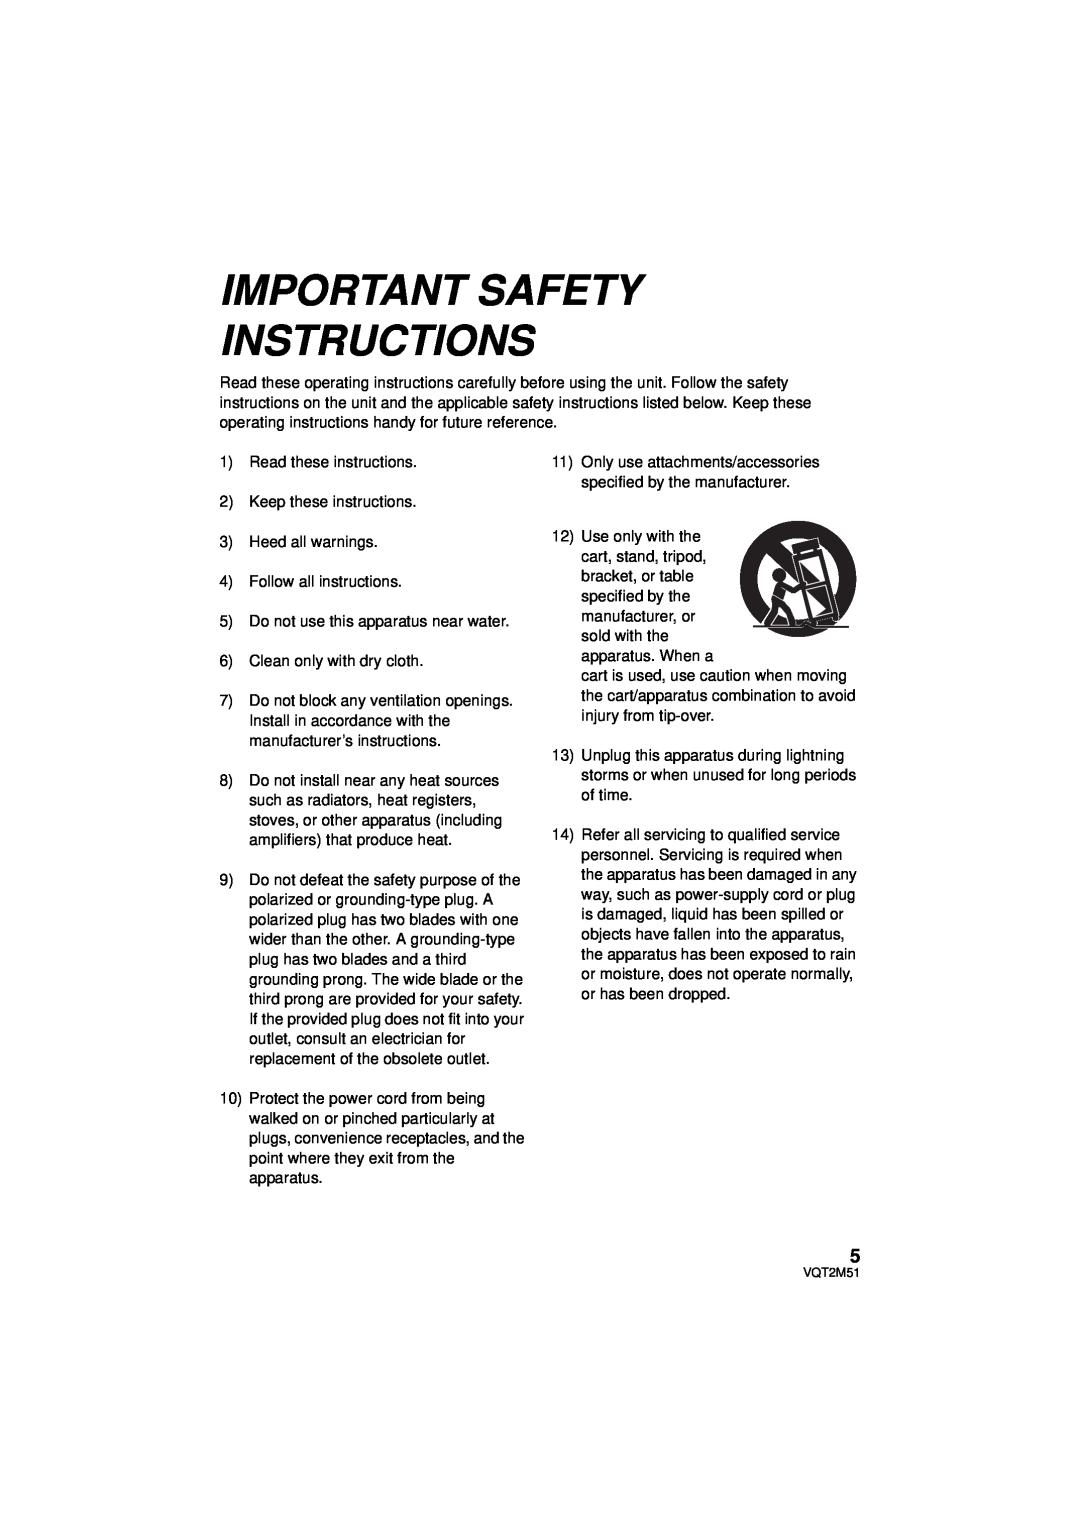 Panasonic HDC-TM60P/PC, HDC-SD60P/PC, HDC-TM55P/PC, HDC-HS60P/PC operating instructions Important Safety Instructions 